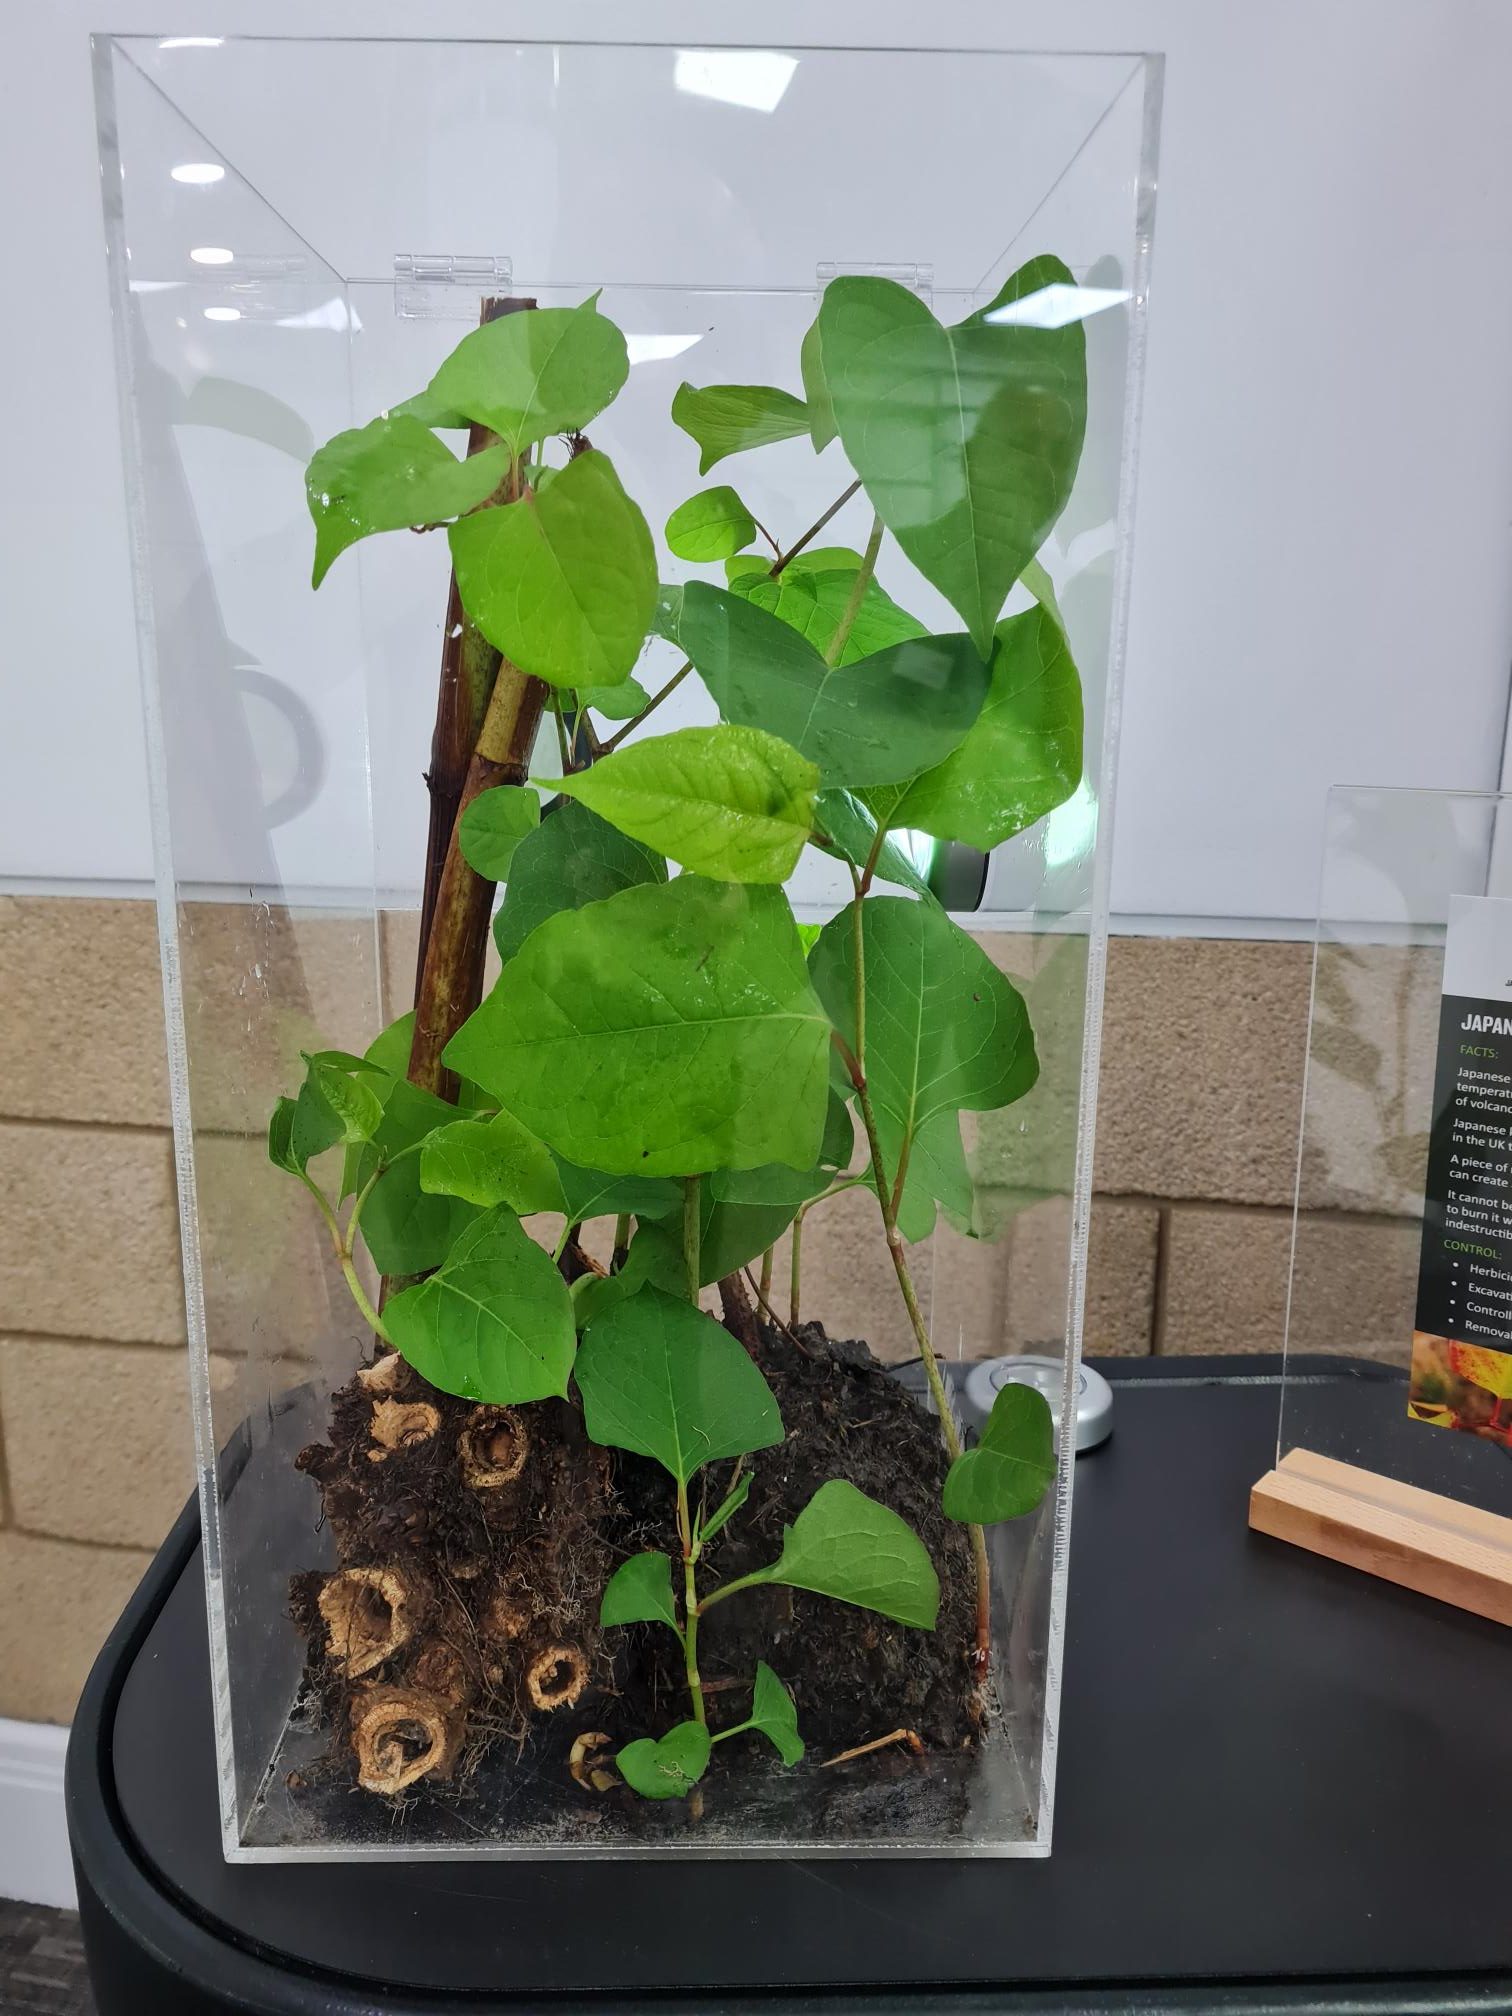 Japanese knotweed in a display case showing green shovel-shaped leaves and roots